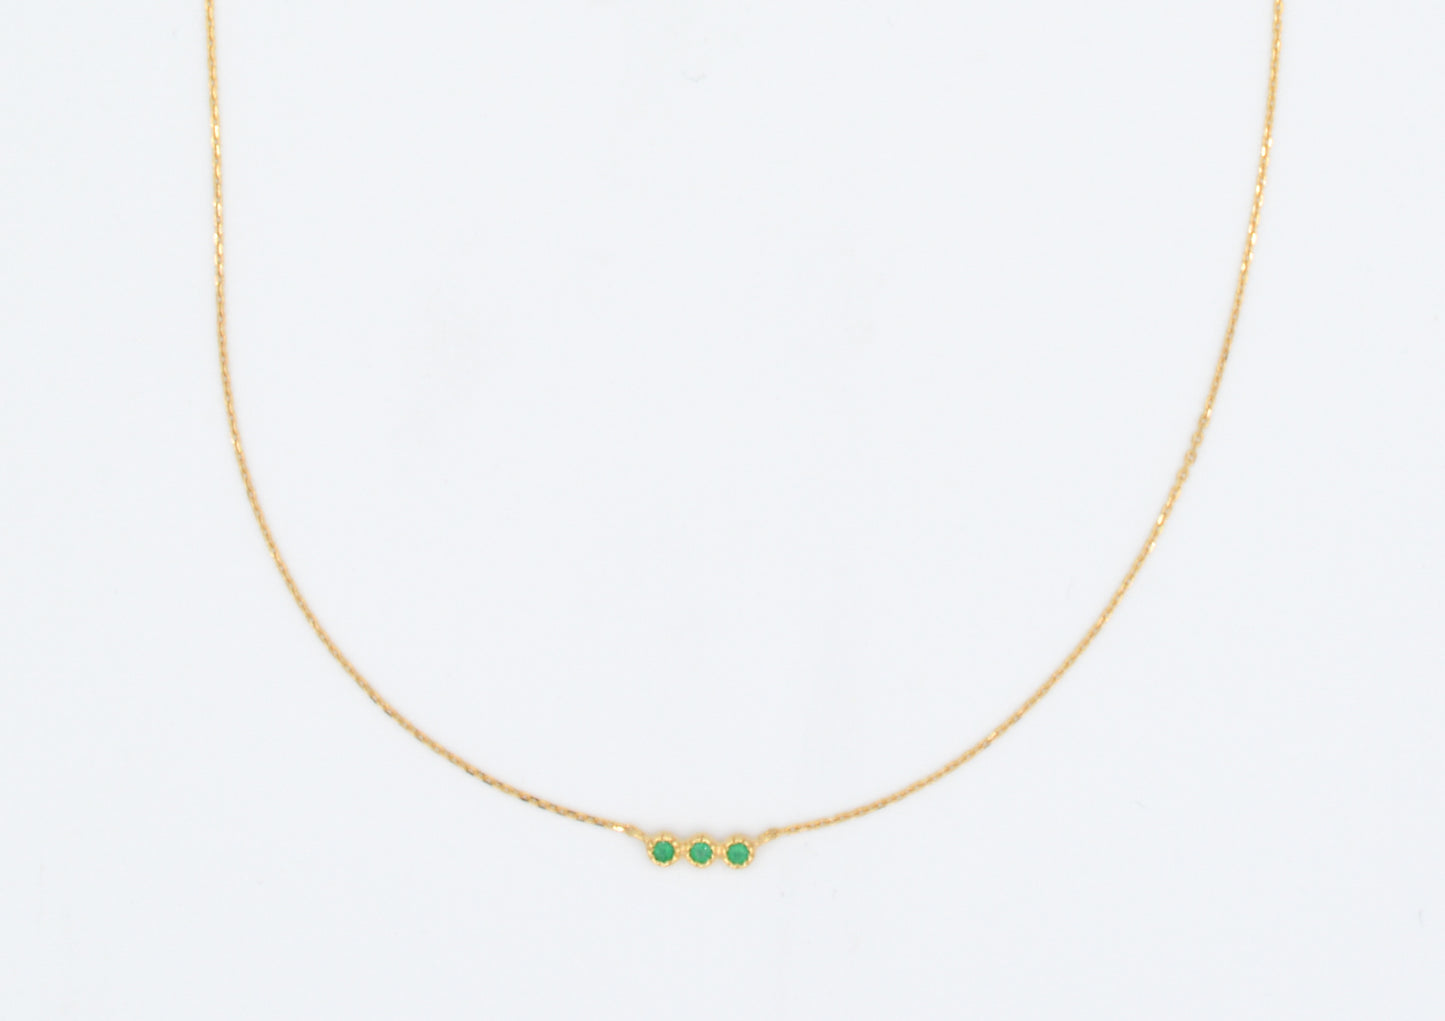 Green onyx delicate bar necklace